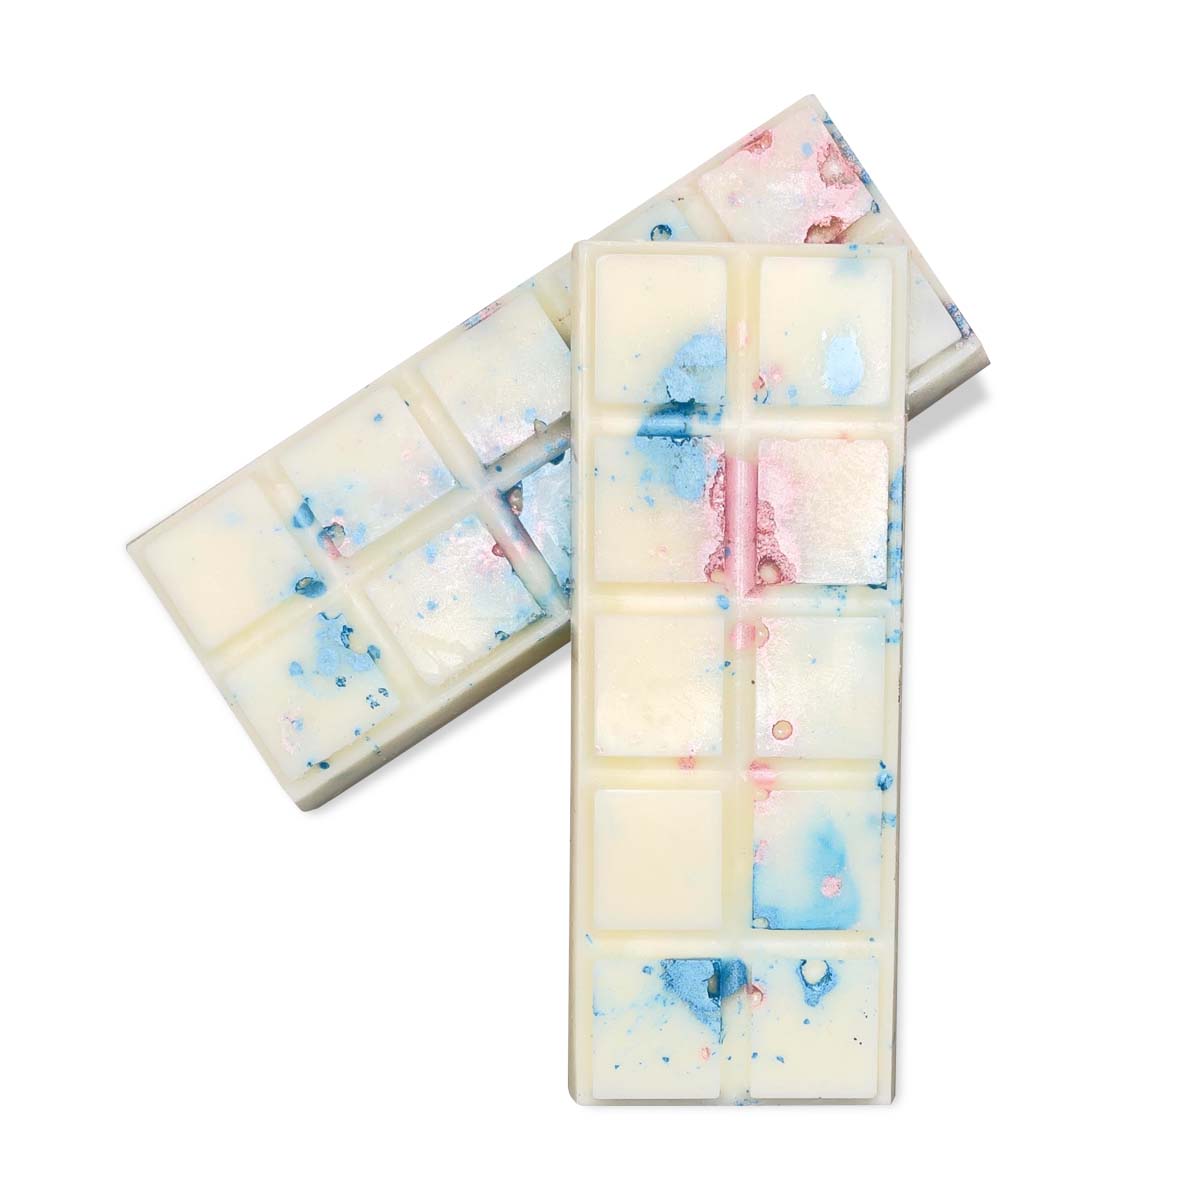 Elevate your senses with our Lily and Cotton Snap Bar. Crafted from natural soy wax, it envelops your space in a tranquil ambiance.